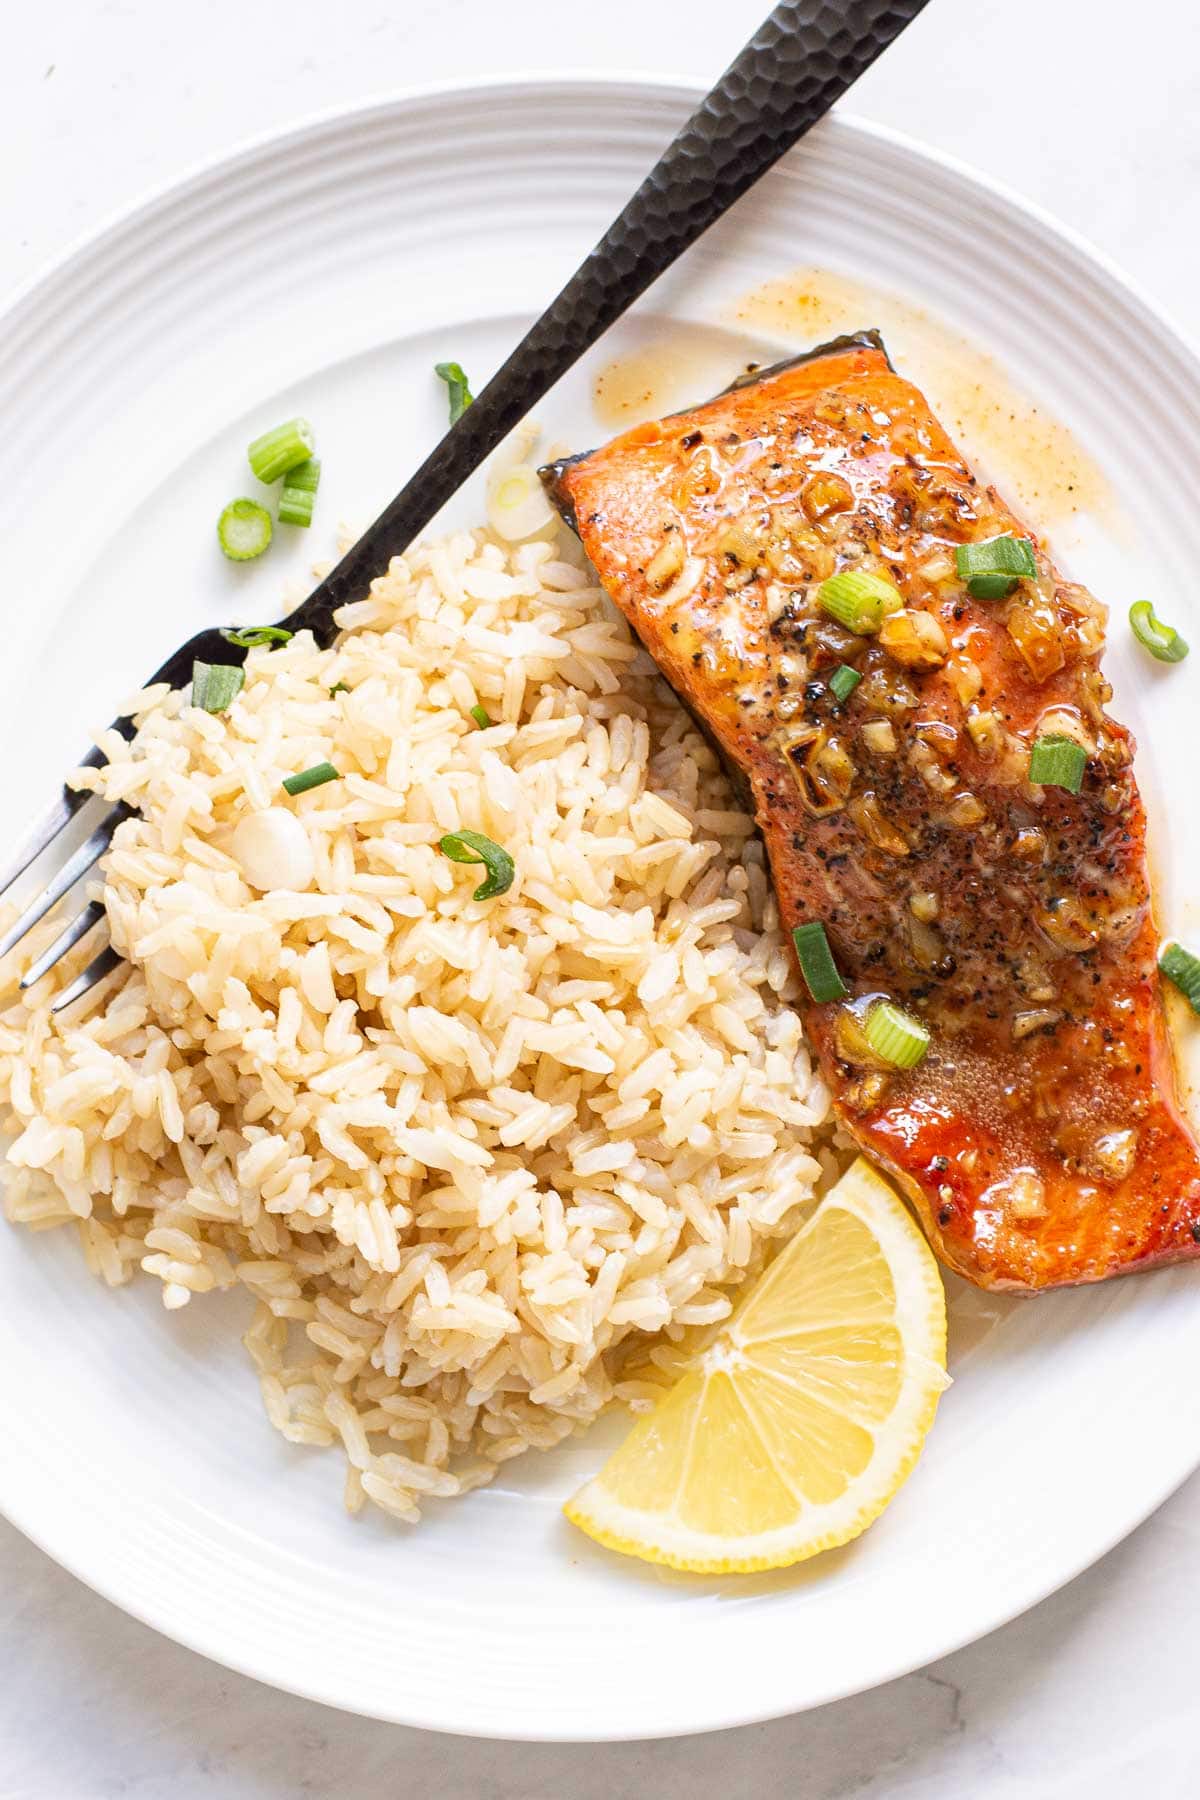 Honey garlic glazed salmon with brown rice and lemon wedge on white plate with black fork.